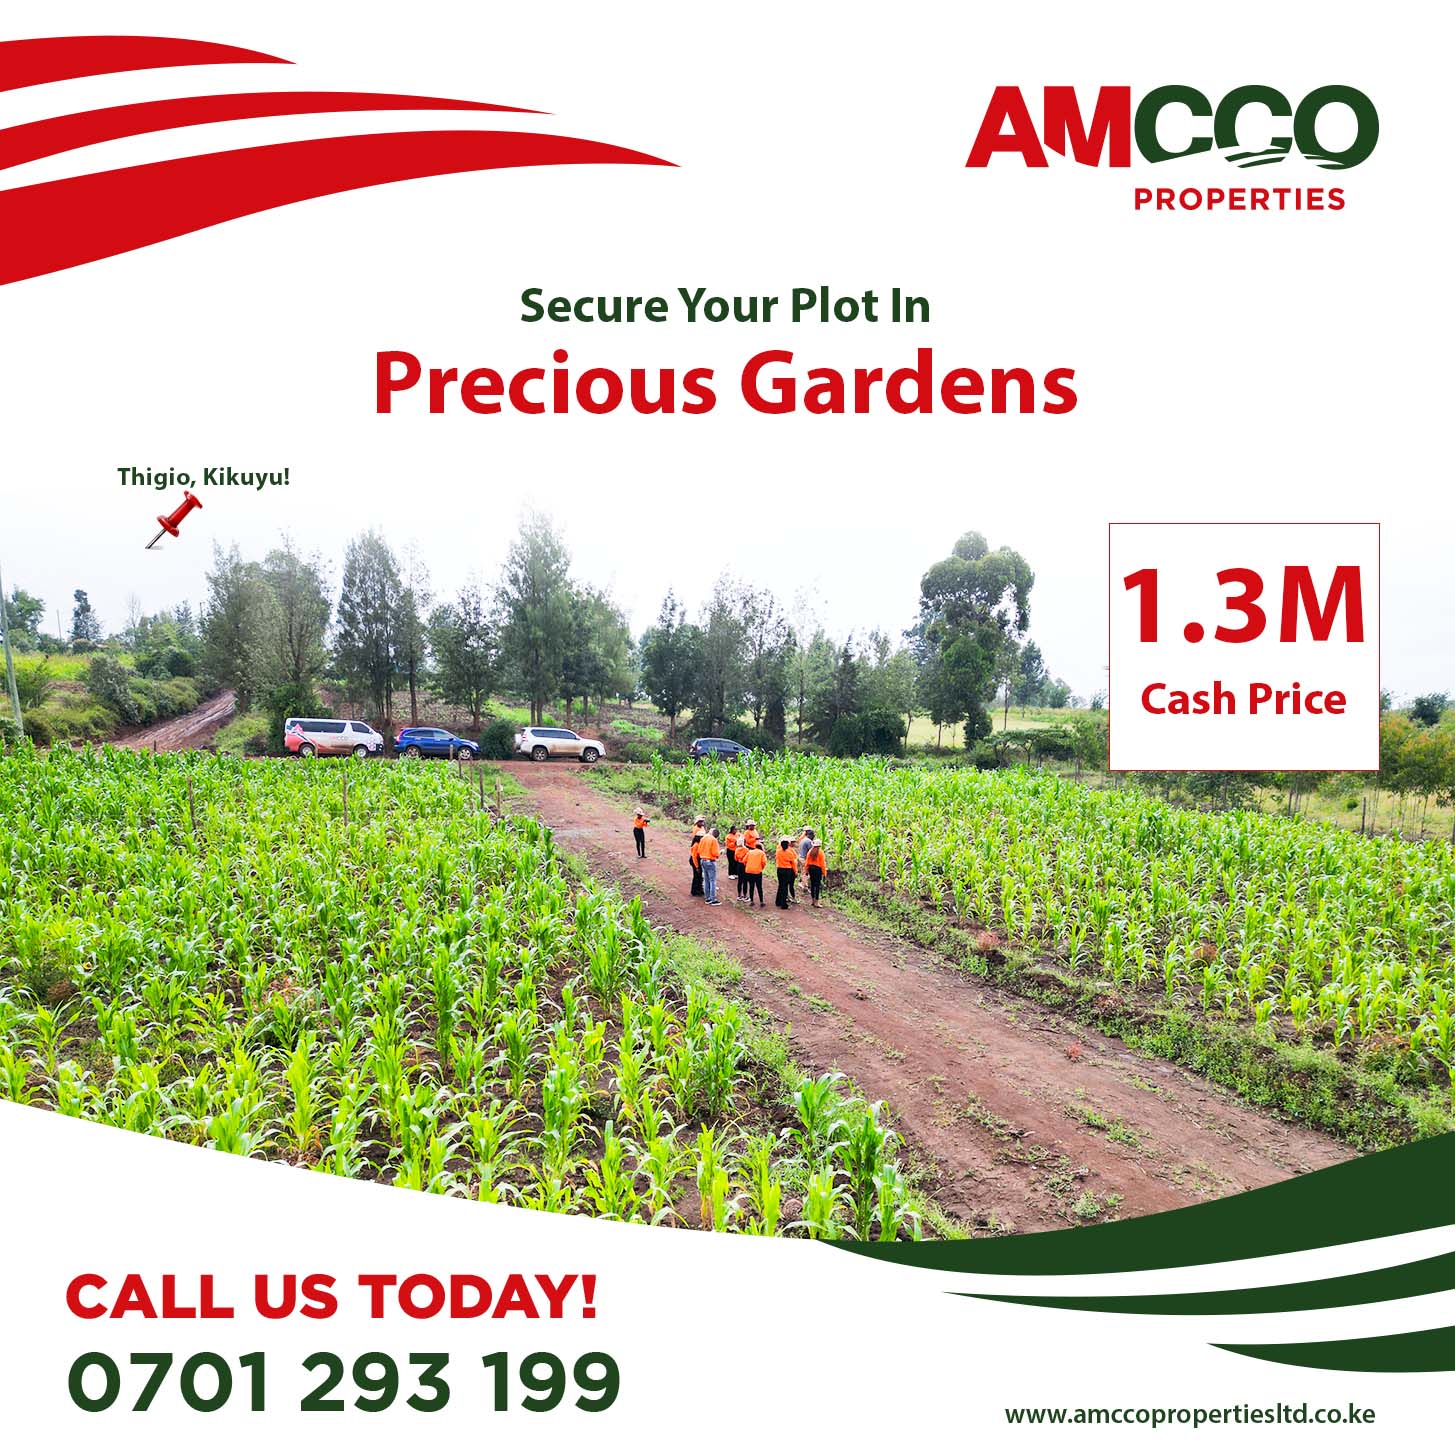 Discover Your Dream Space: Plots for Sale in Kikuyu by Amcco Properties